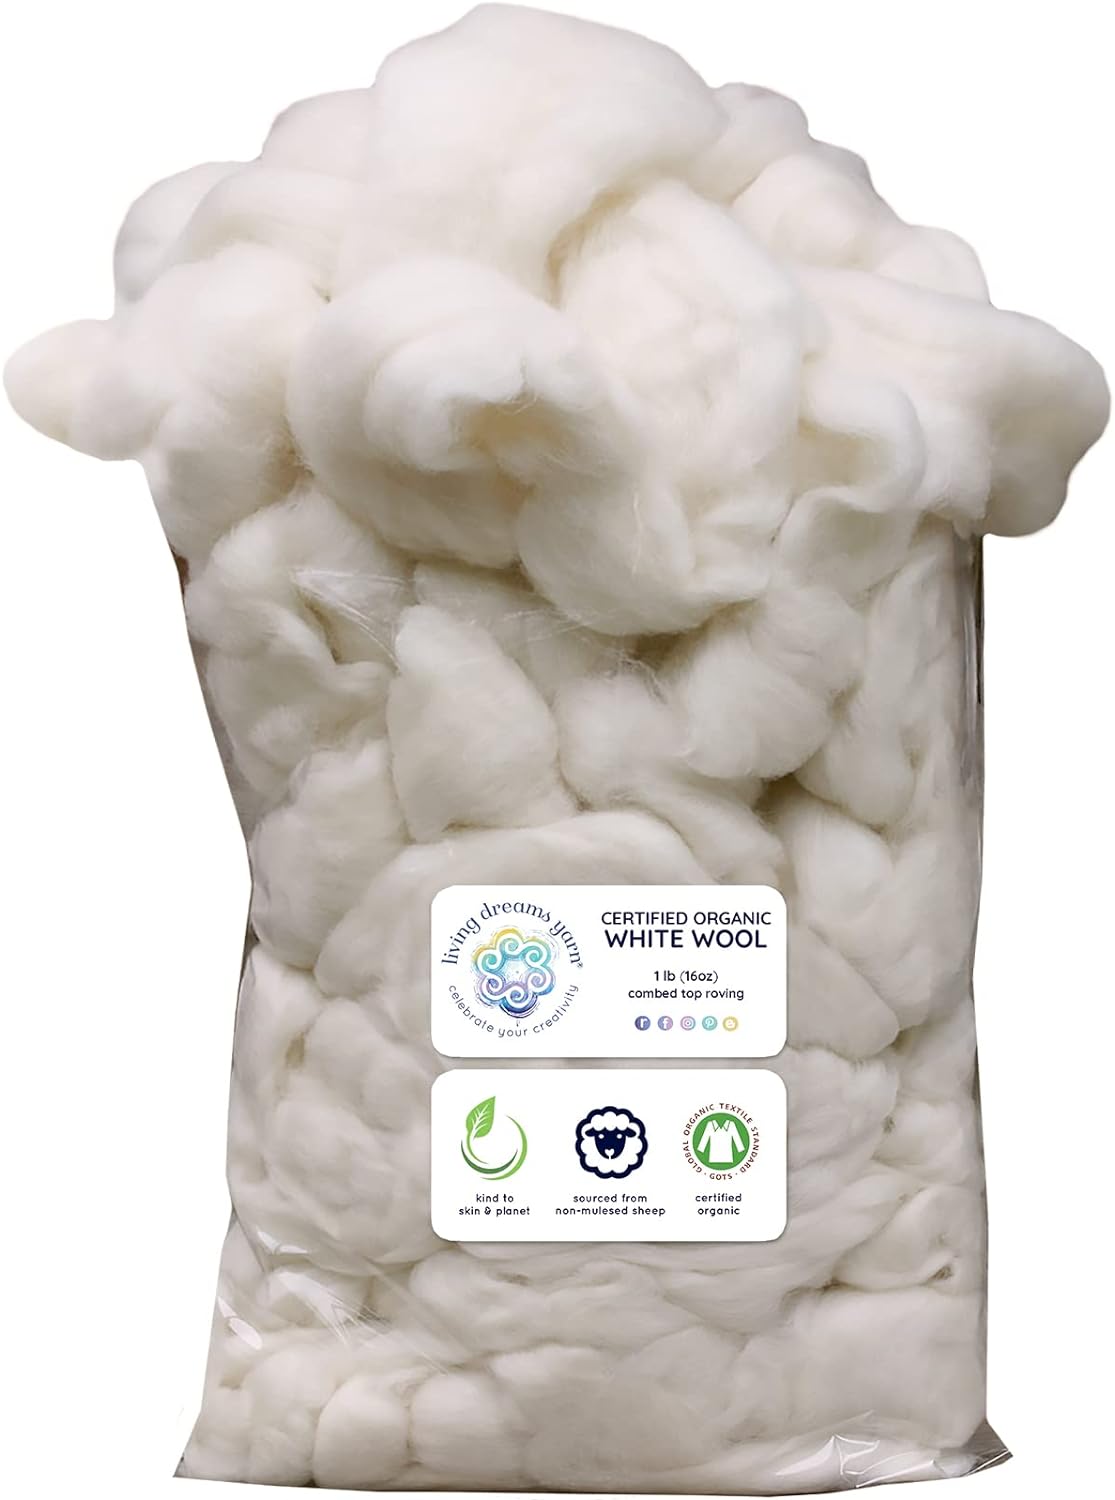 CERTIFIED ORGANIC UK Wool Roving. Ethically &#x26; Responsibly Sourced Combed Top Fiber for Spinning, Felting, Filling - 1 lb Bag, Natural White